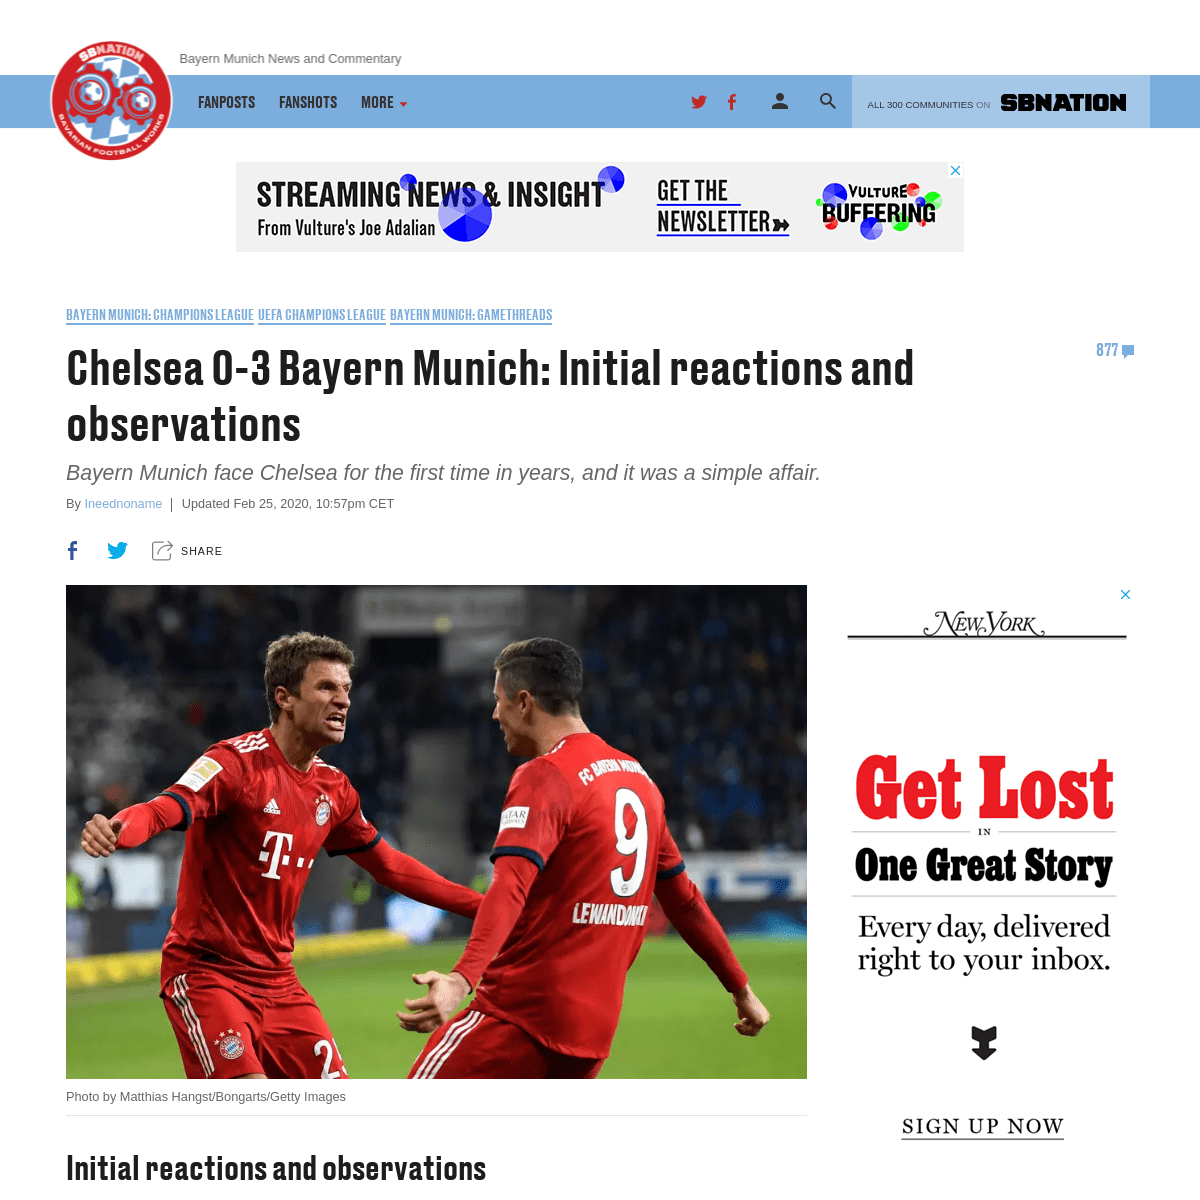 A complete backup of www.bavarianfootballworks.com/2020/2/25/21152214/chelsea-vs-bayern-munich-lineups-live-stream-how-to-watch-